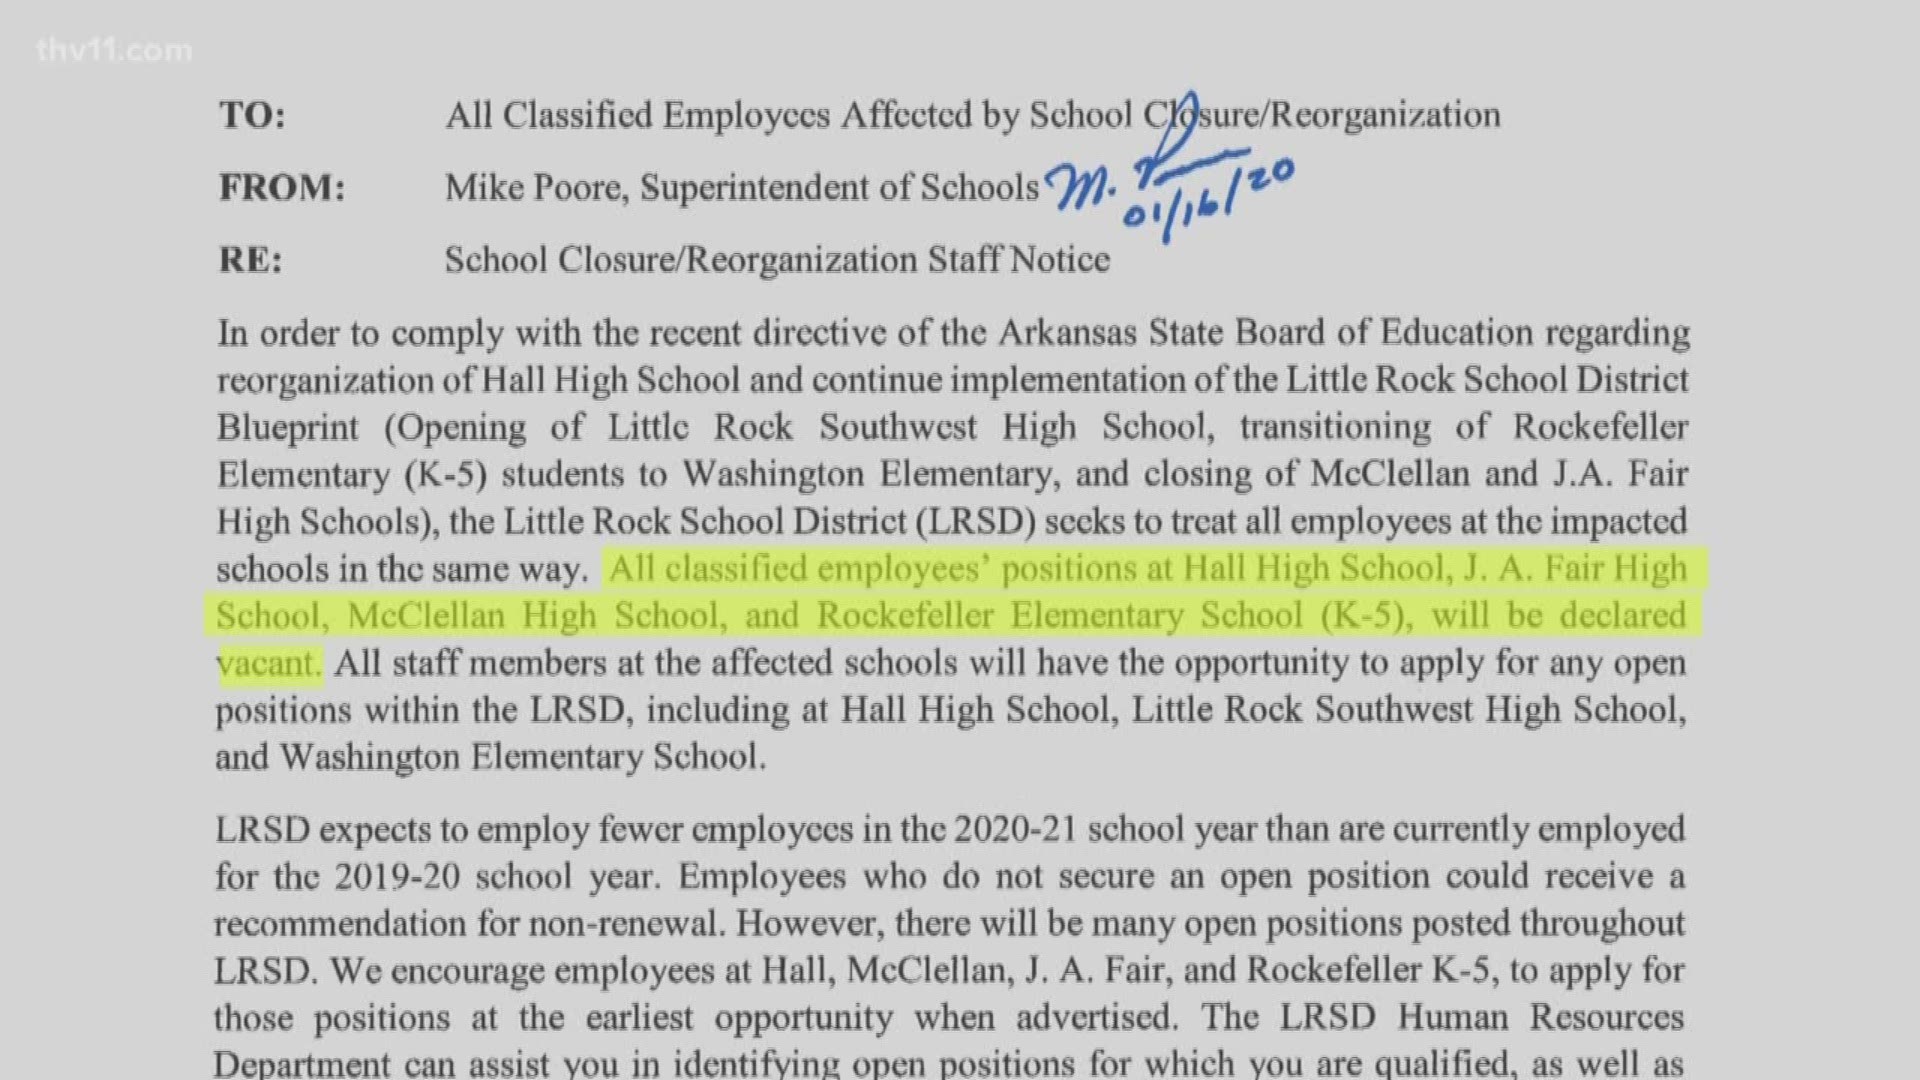 There's been a lot of fears and confusion going around for the past 24 hours in the LRSD community after an email sent out yesterday by the superintendent.